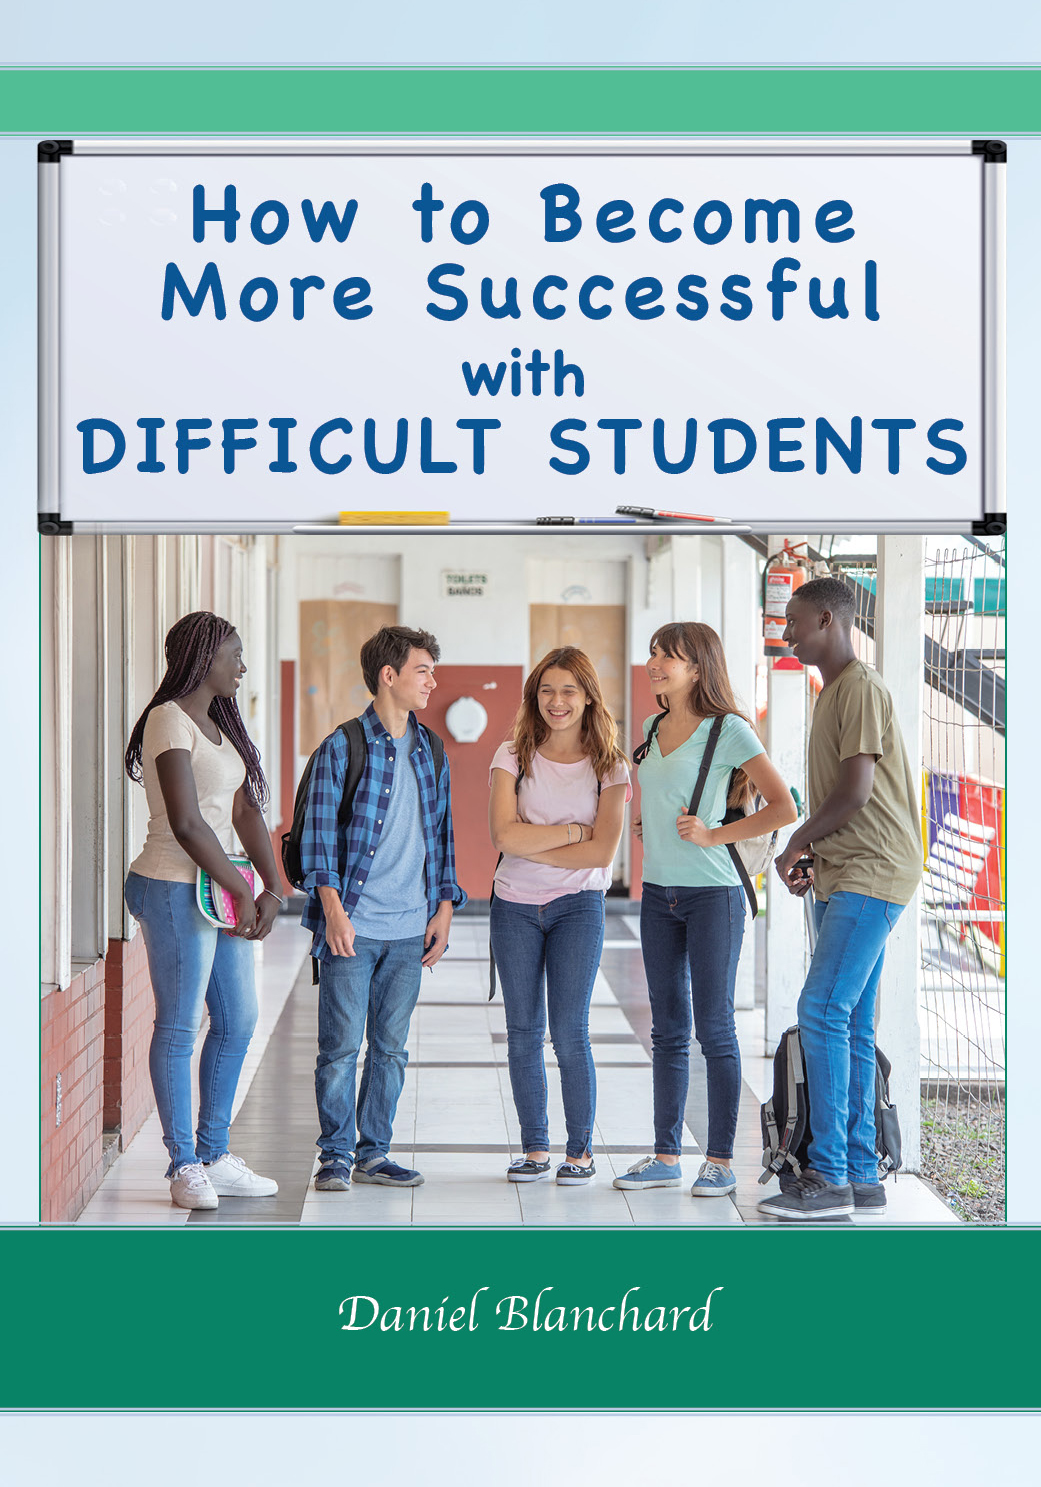 FREE: How to Become More Successful with DIFFICULT STUDENTS by Daniel Blanchard